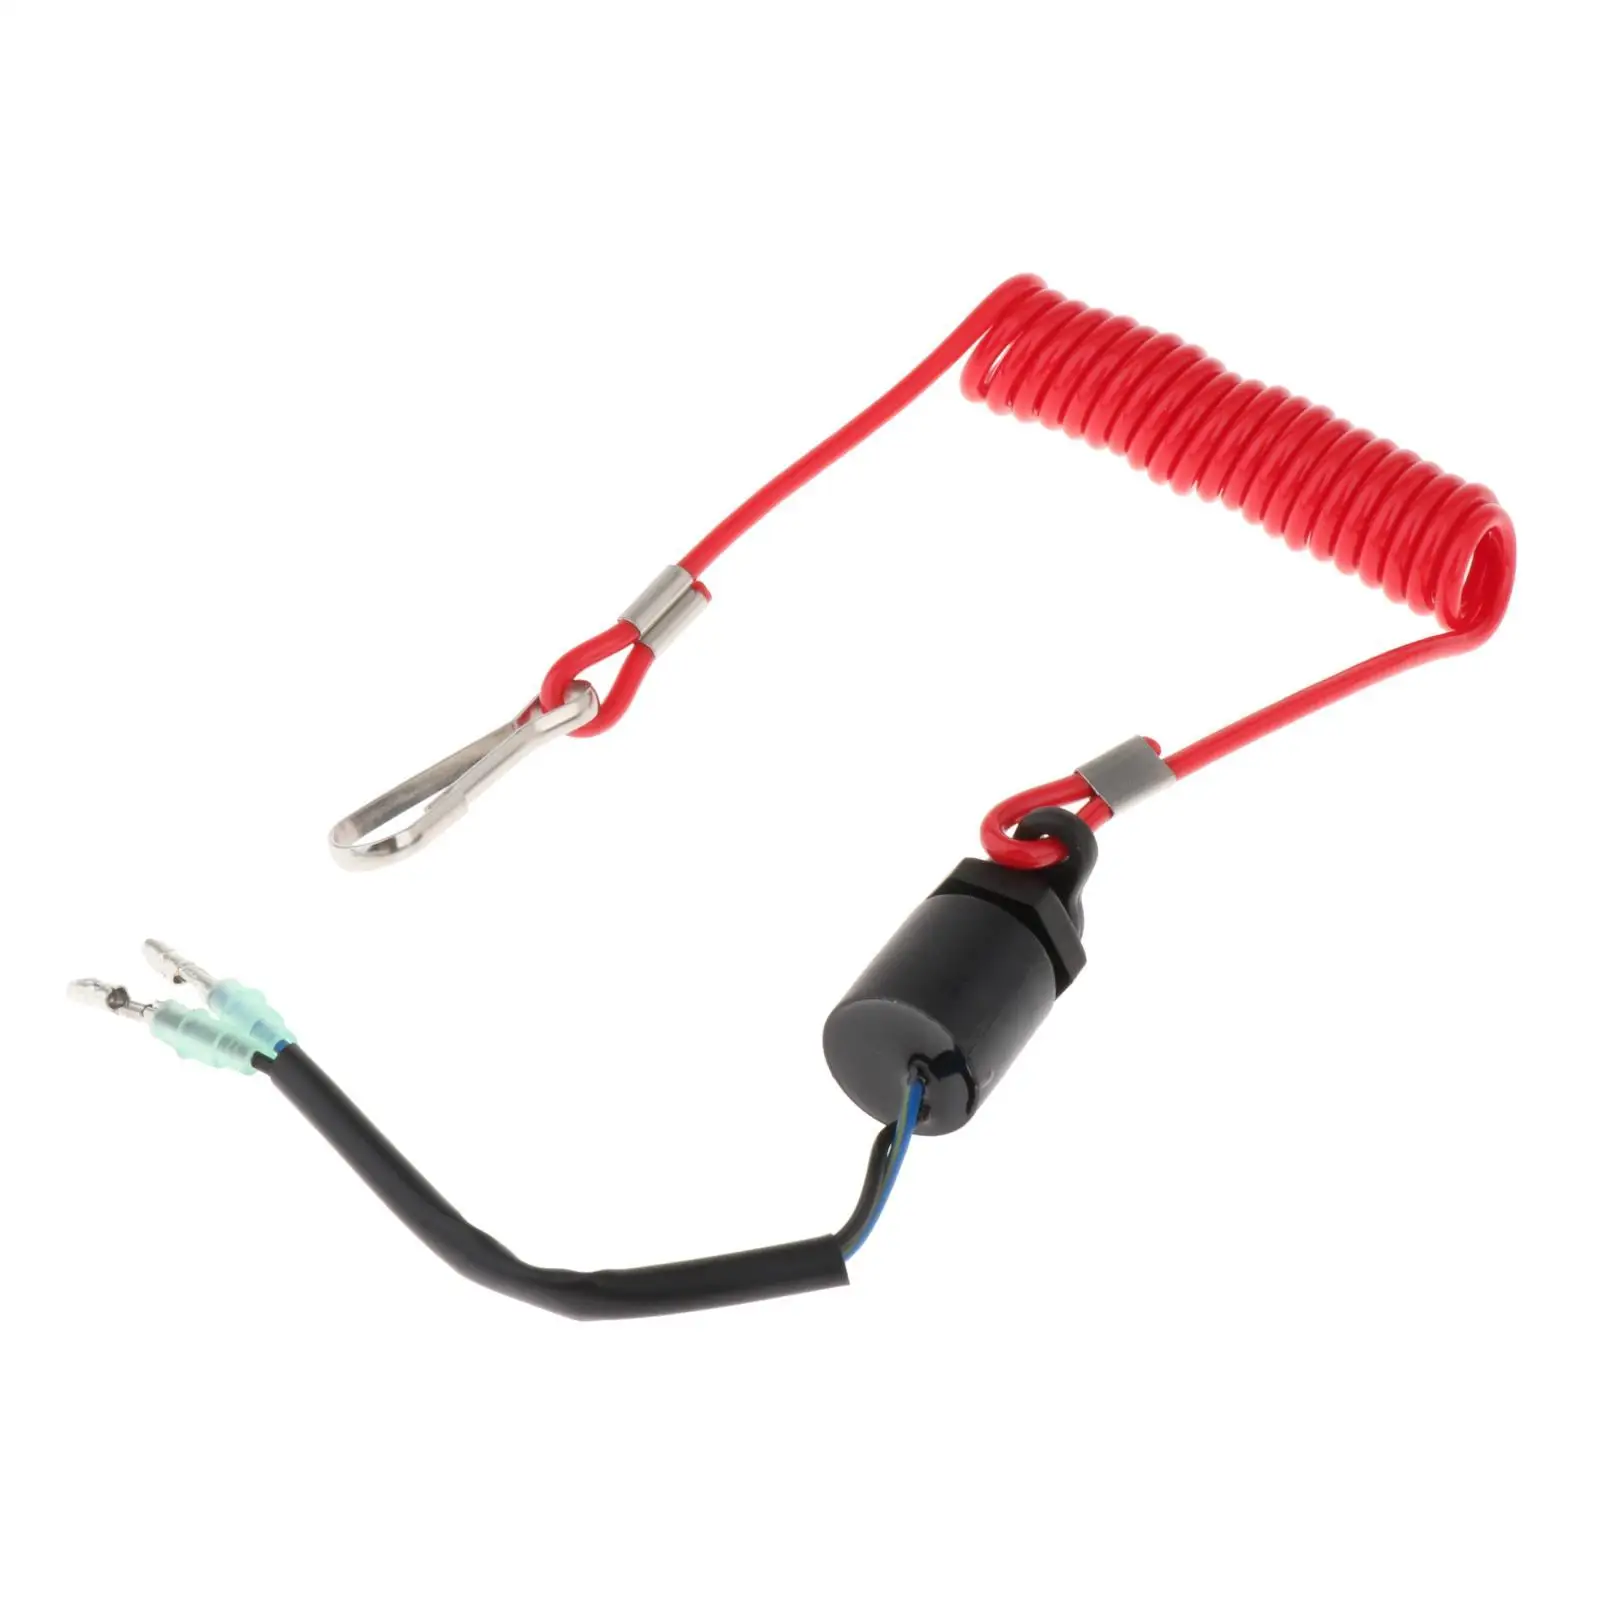 Engine Stop Kill Switch for Suzuki DT DF Outboard Motors 4HP-100HP